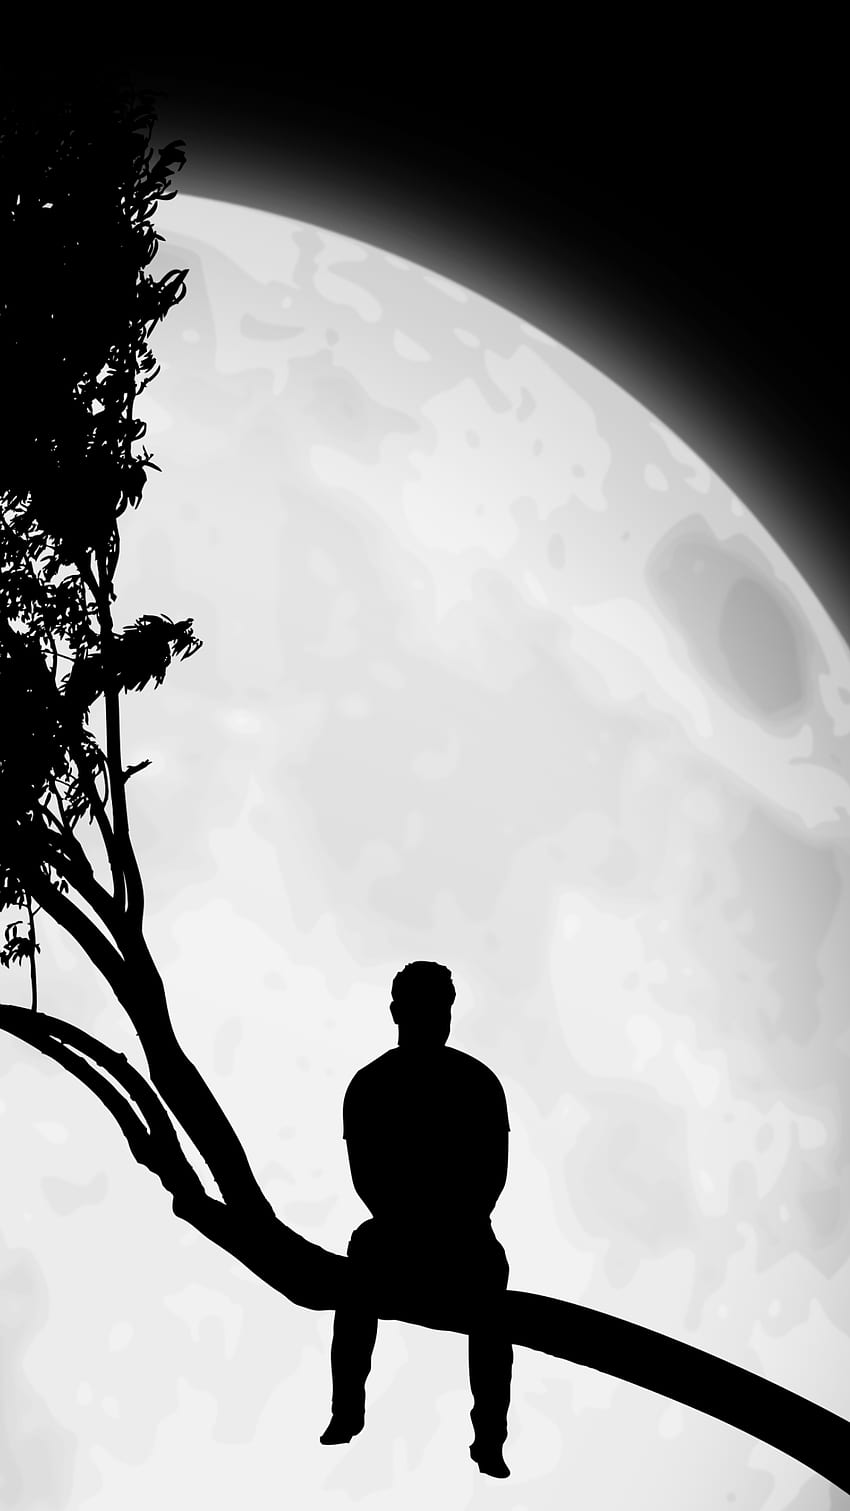 Alone with moon. Alone art, Lonely art, Alone boy HD phone wallpaper